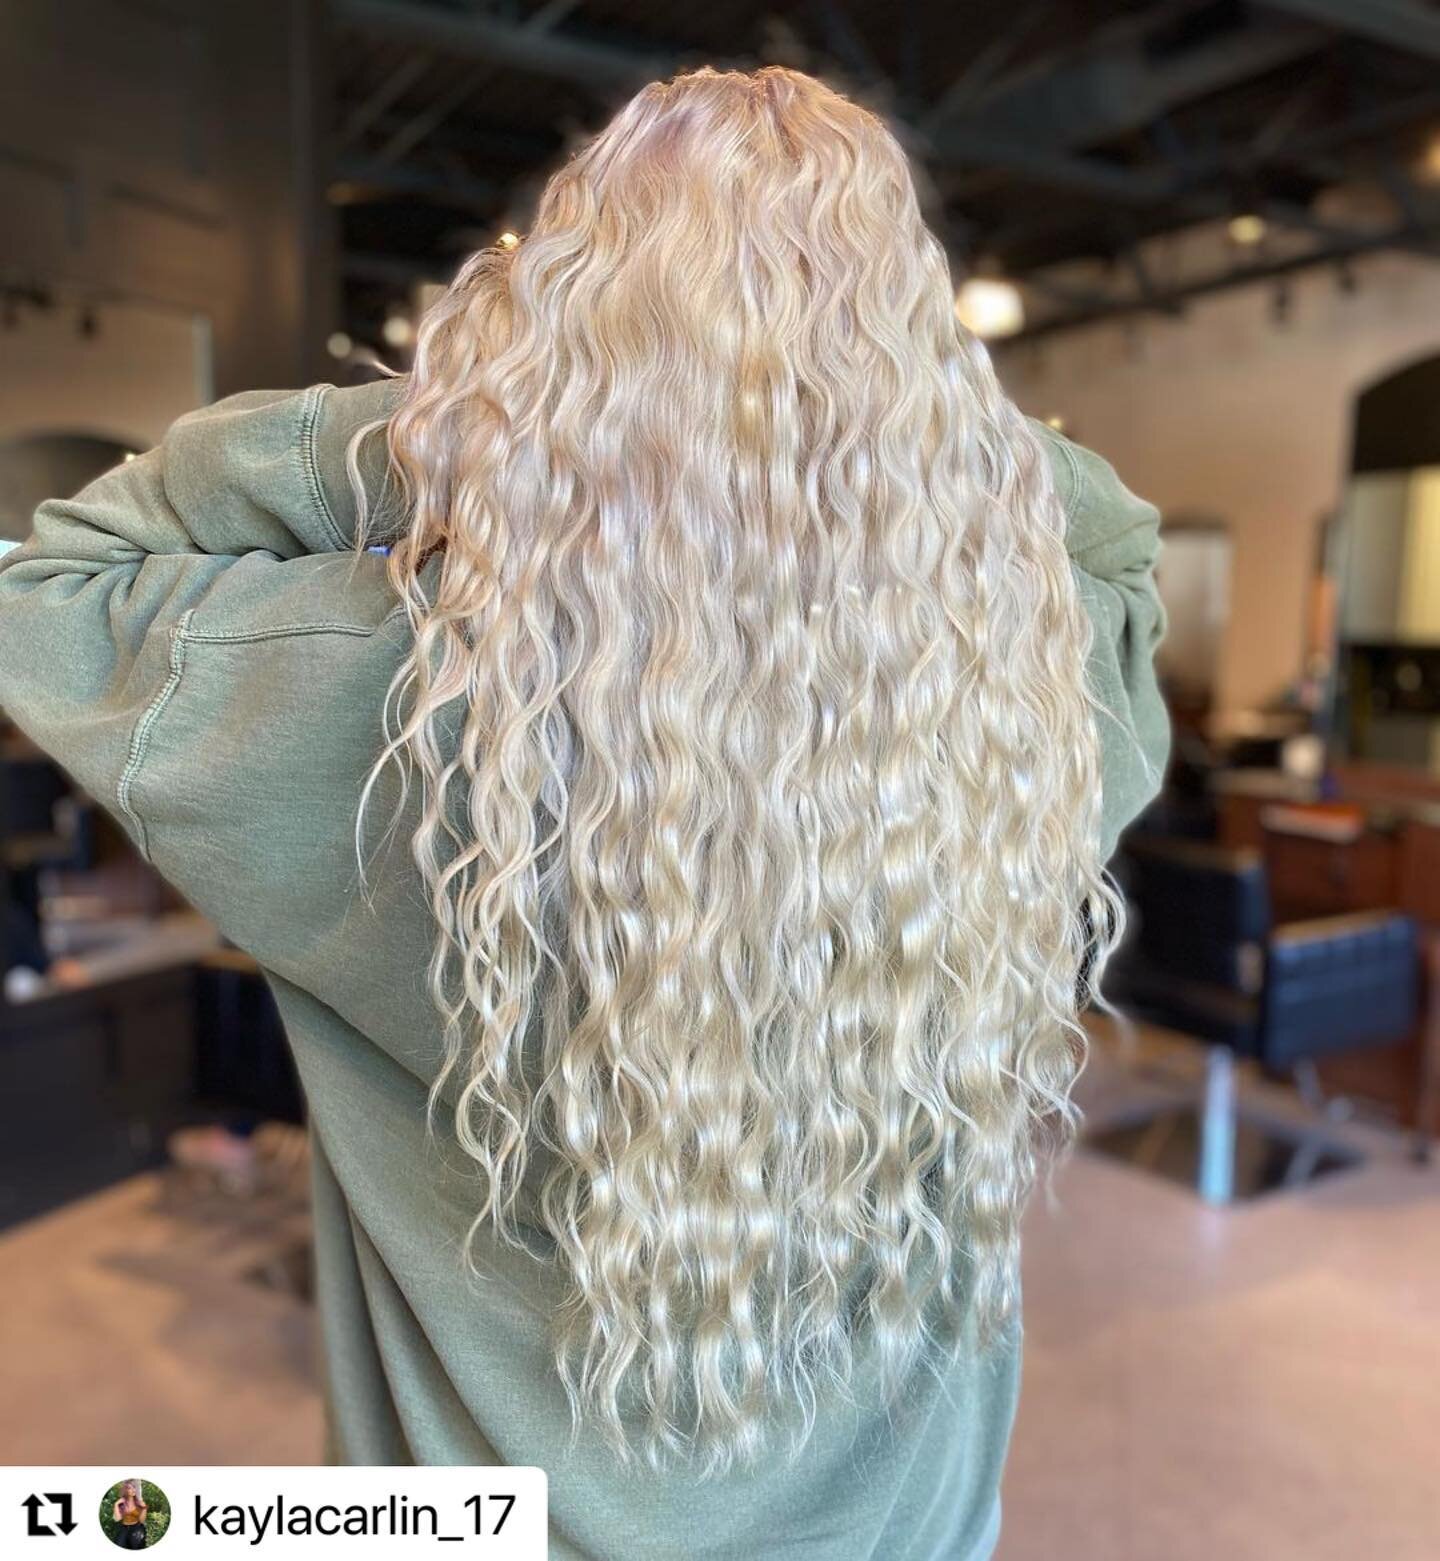 A sea of waves 🌊 🌊🌊🌊

#blonde #blondehair #blondes #blondehighlights #behindthechair #behindthechairstylist #amika #goldwell #collegevillepa #waveyhair #curling #curlinghair #curlingiron